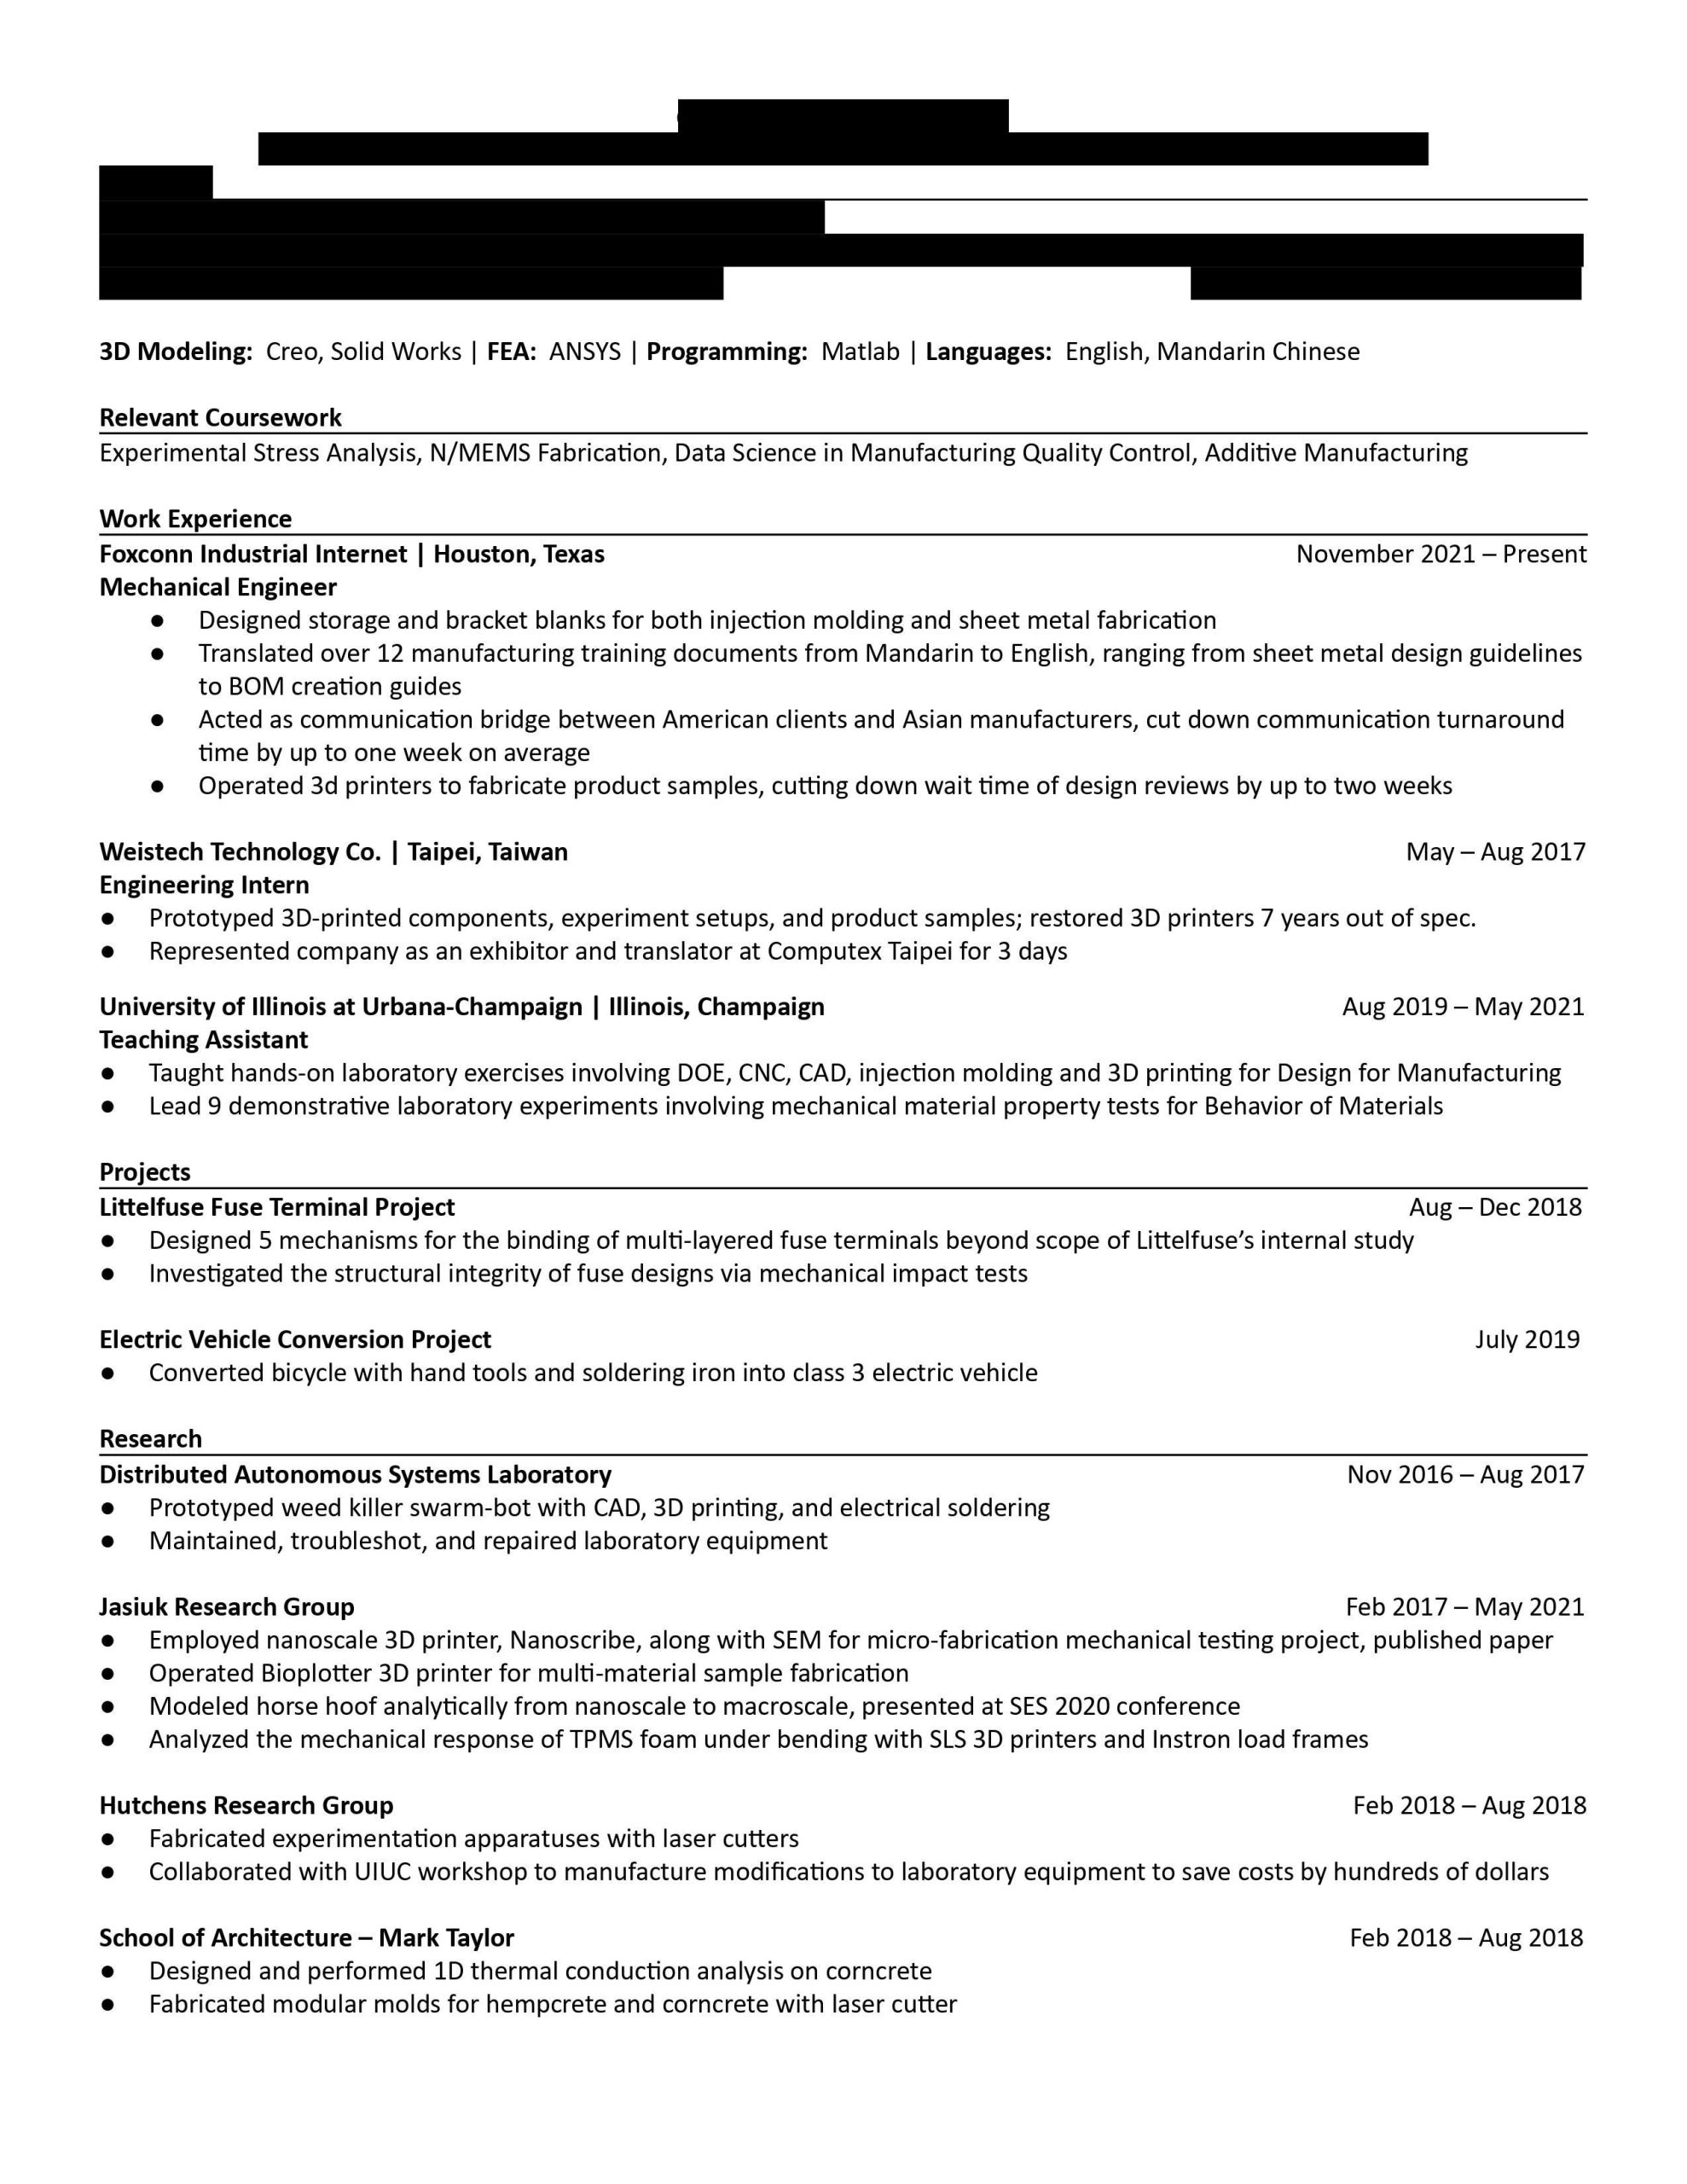 Sample Resume for Professional Cutter Bindery Updating Resume for H1b Filing, Figured Might as Well Do It Right …